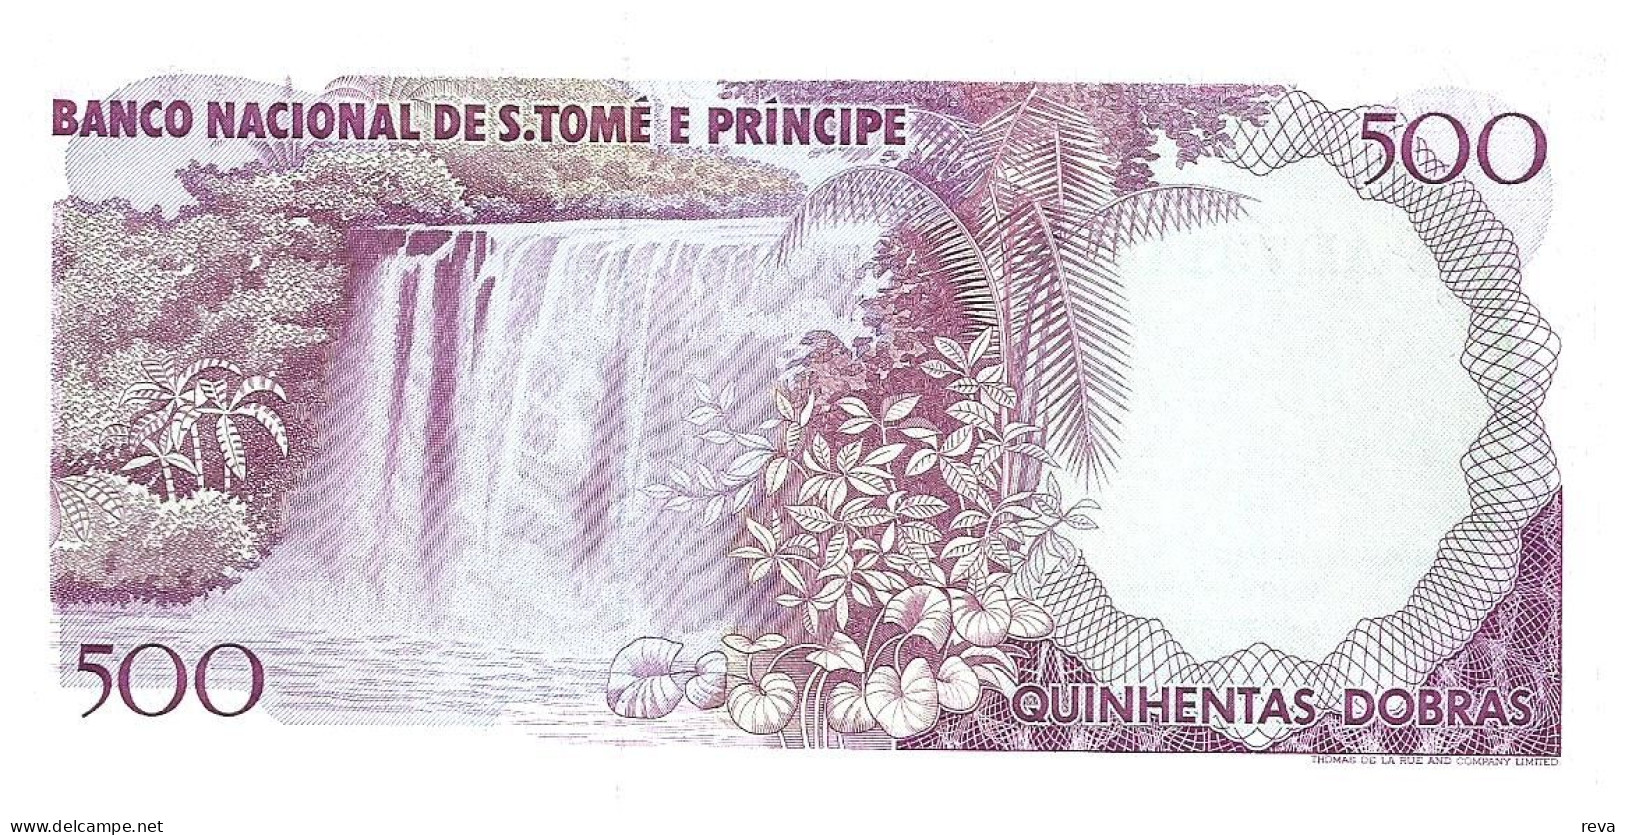 SAO TOME AND PRINCIPE 500 DOBRAS PURPLE MAN FRONT WATERFALL FLOWERS BACK DATED 04-01-1989 UNC P.? READ DESCRIPTION - Sao Tome And Principe